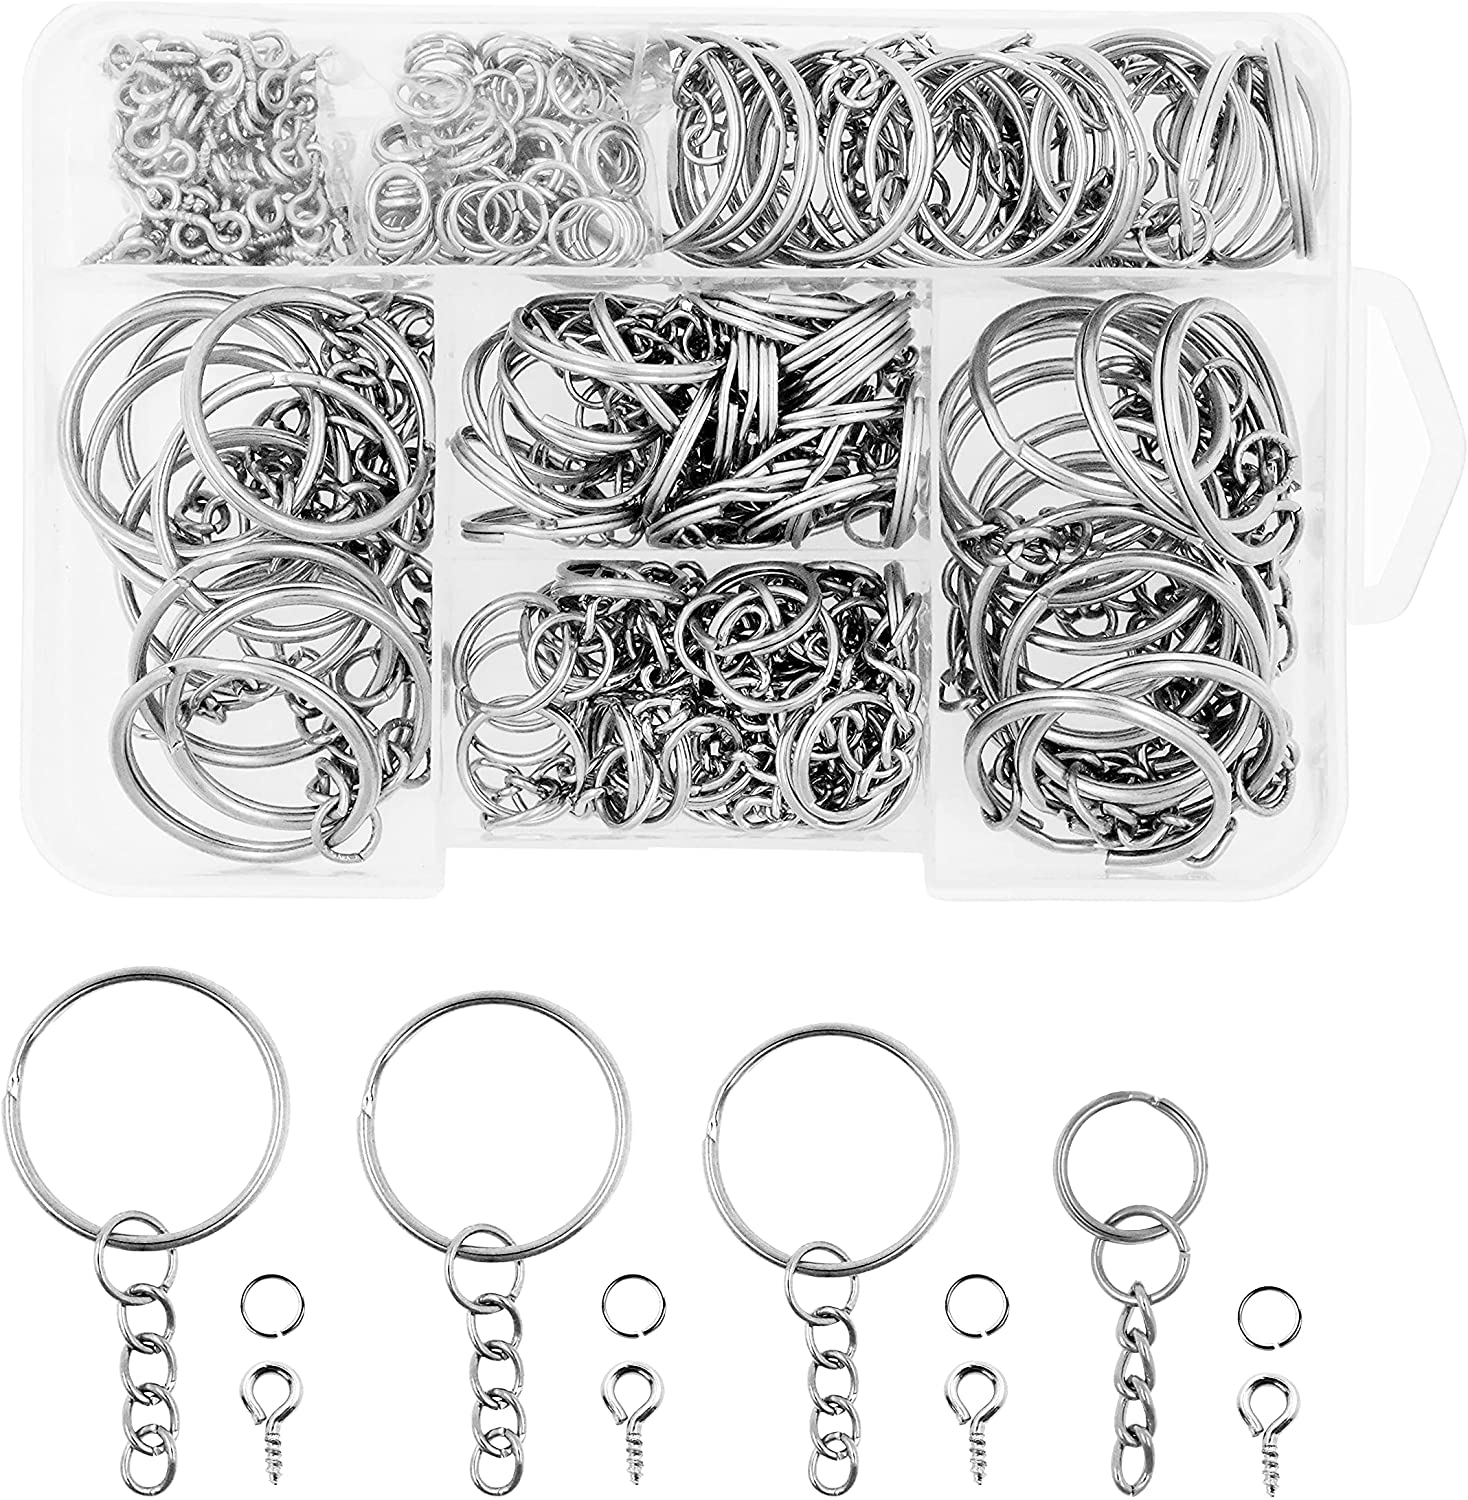 Mandala Crafts Large Metal Split Key Rings for Crafts, Keys, Keychains, 100  Pieces (1.25 Inches 32MM, Silver)